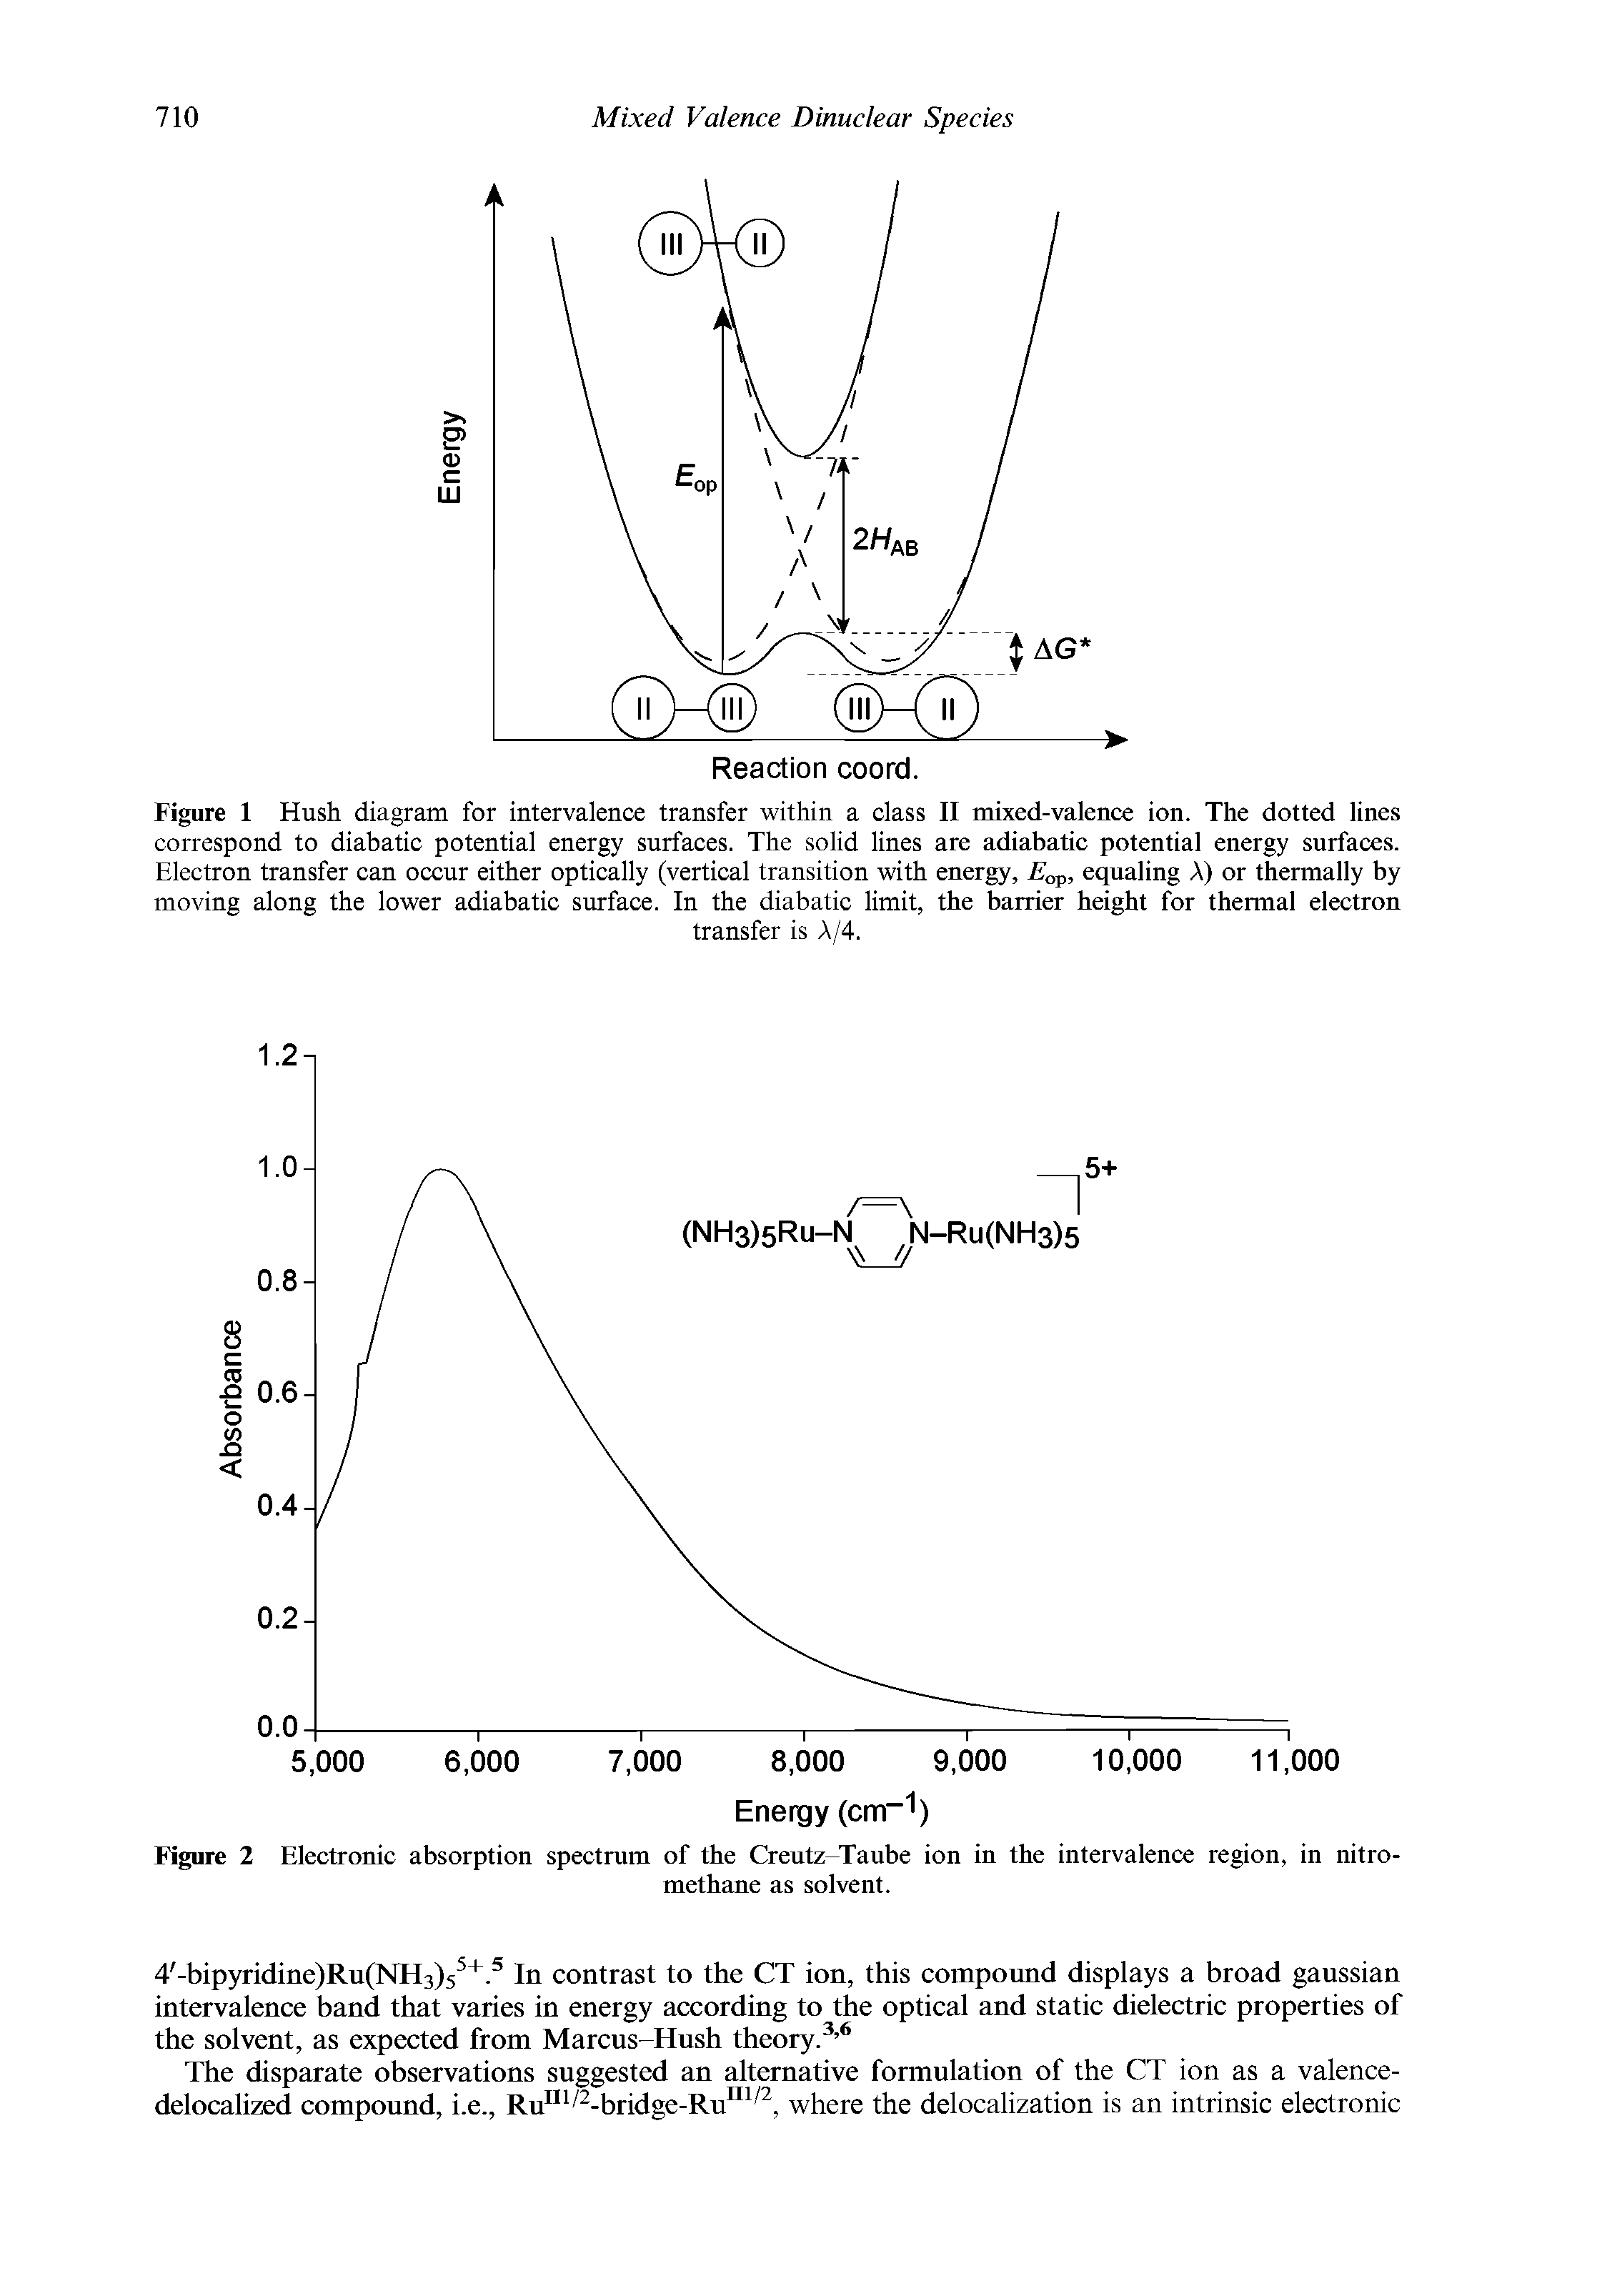 Figure 1 Hush diagram for intervalence transfer within a class II mixed-valence ion. The dotted lines correspond to diabatic potential energy surfaces. The solid lines are adiabatic potential energy surfaces. Electron transfer can occur either optically (vertical transition with energy, Eop, equaling A) or thermally by moving along the lower adiabatic surface. In the diabatic limit, the barrier height for thermal electron...